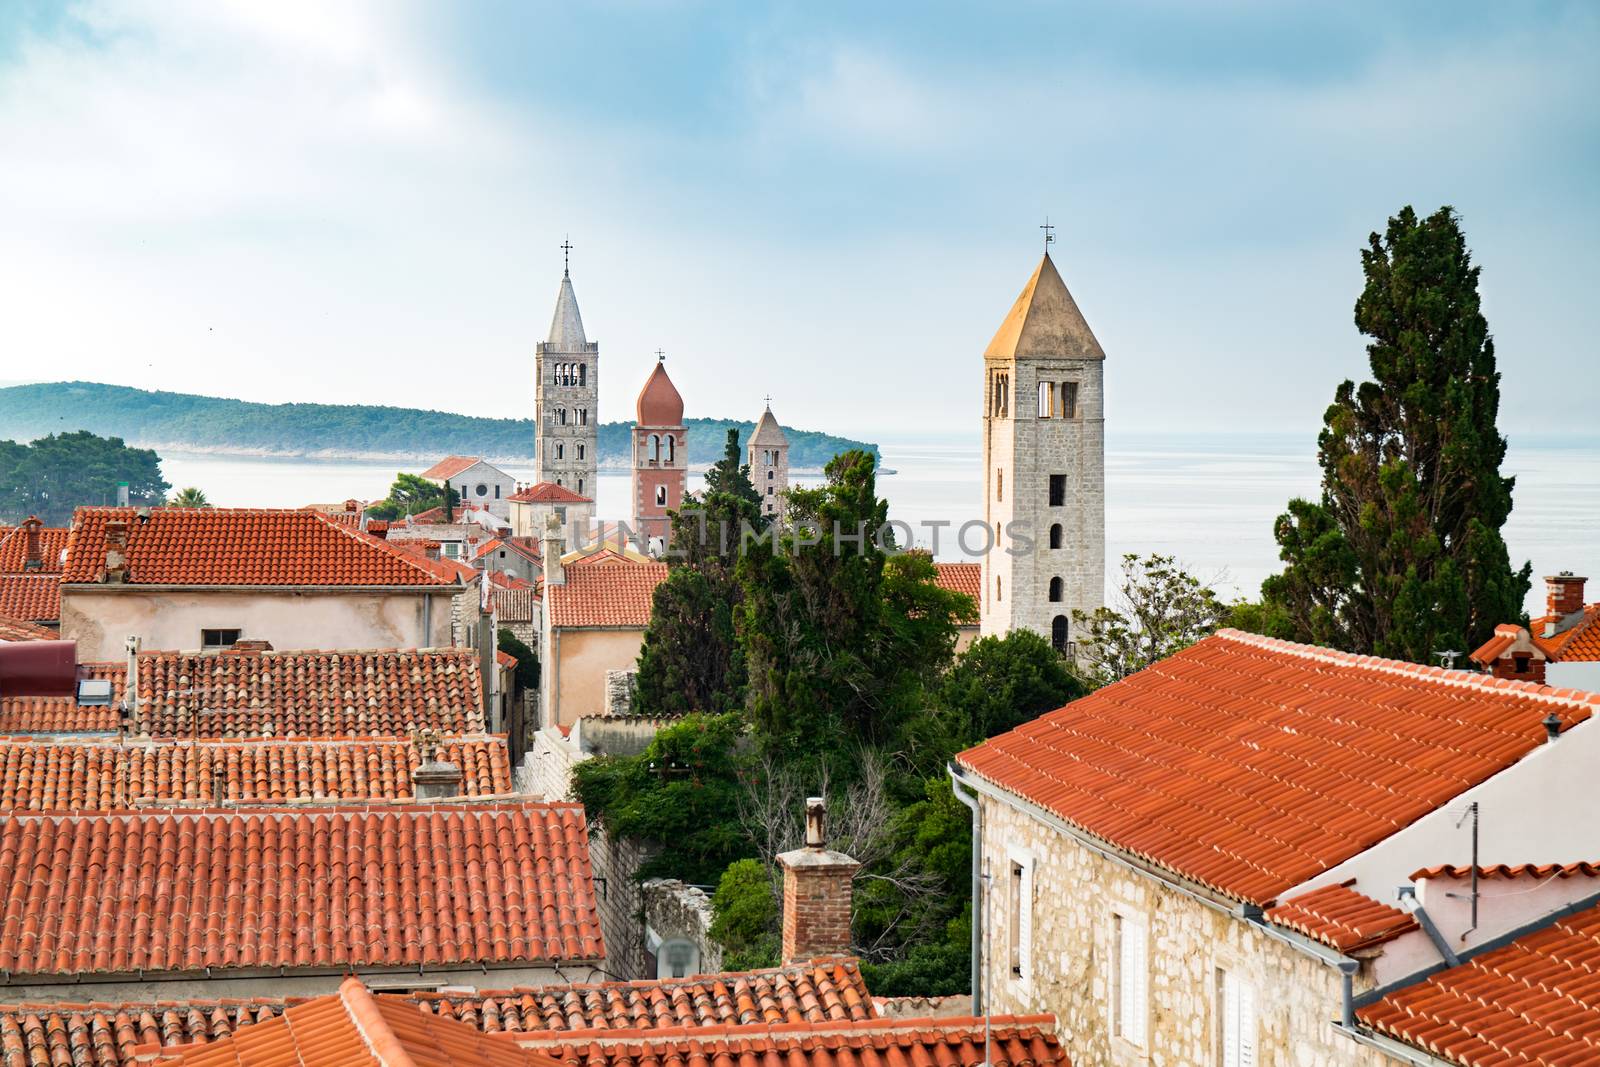 View of the town of Rab, Croatian tourist resort famous for its four bell towers.